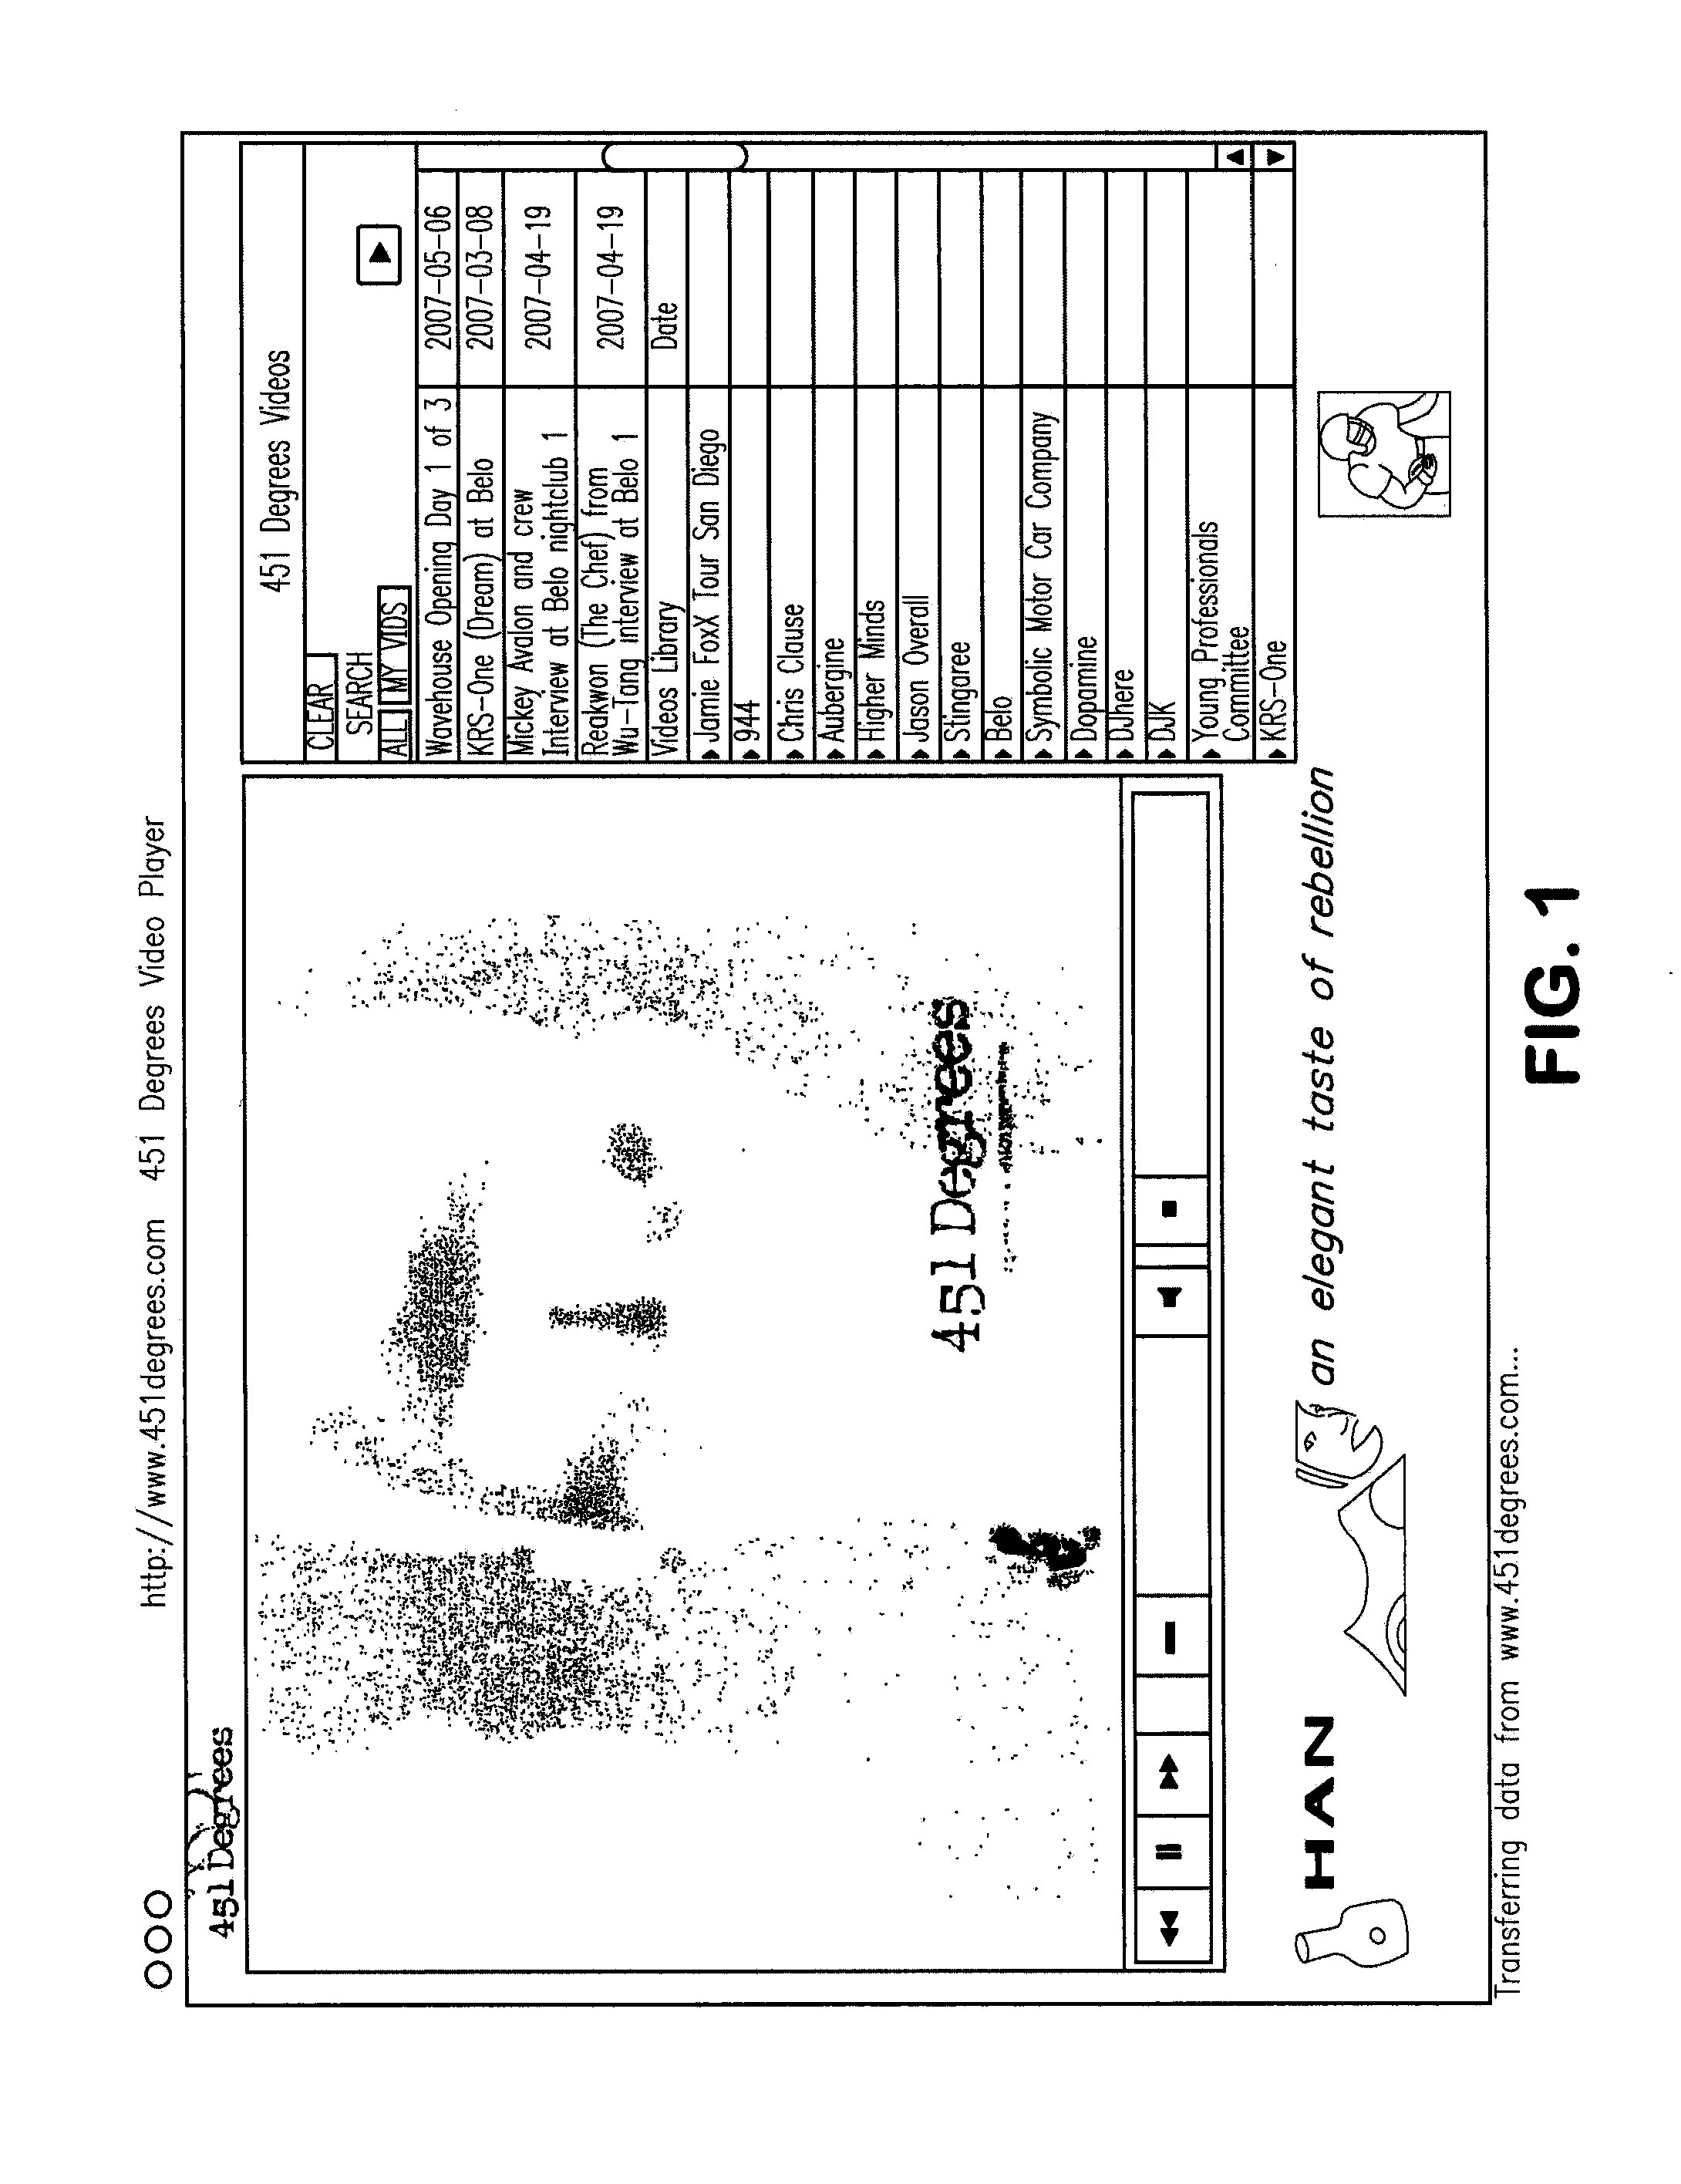 Method and System for Meta-Tagging Media Content and Distribution